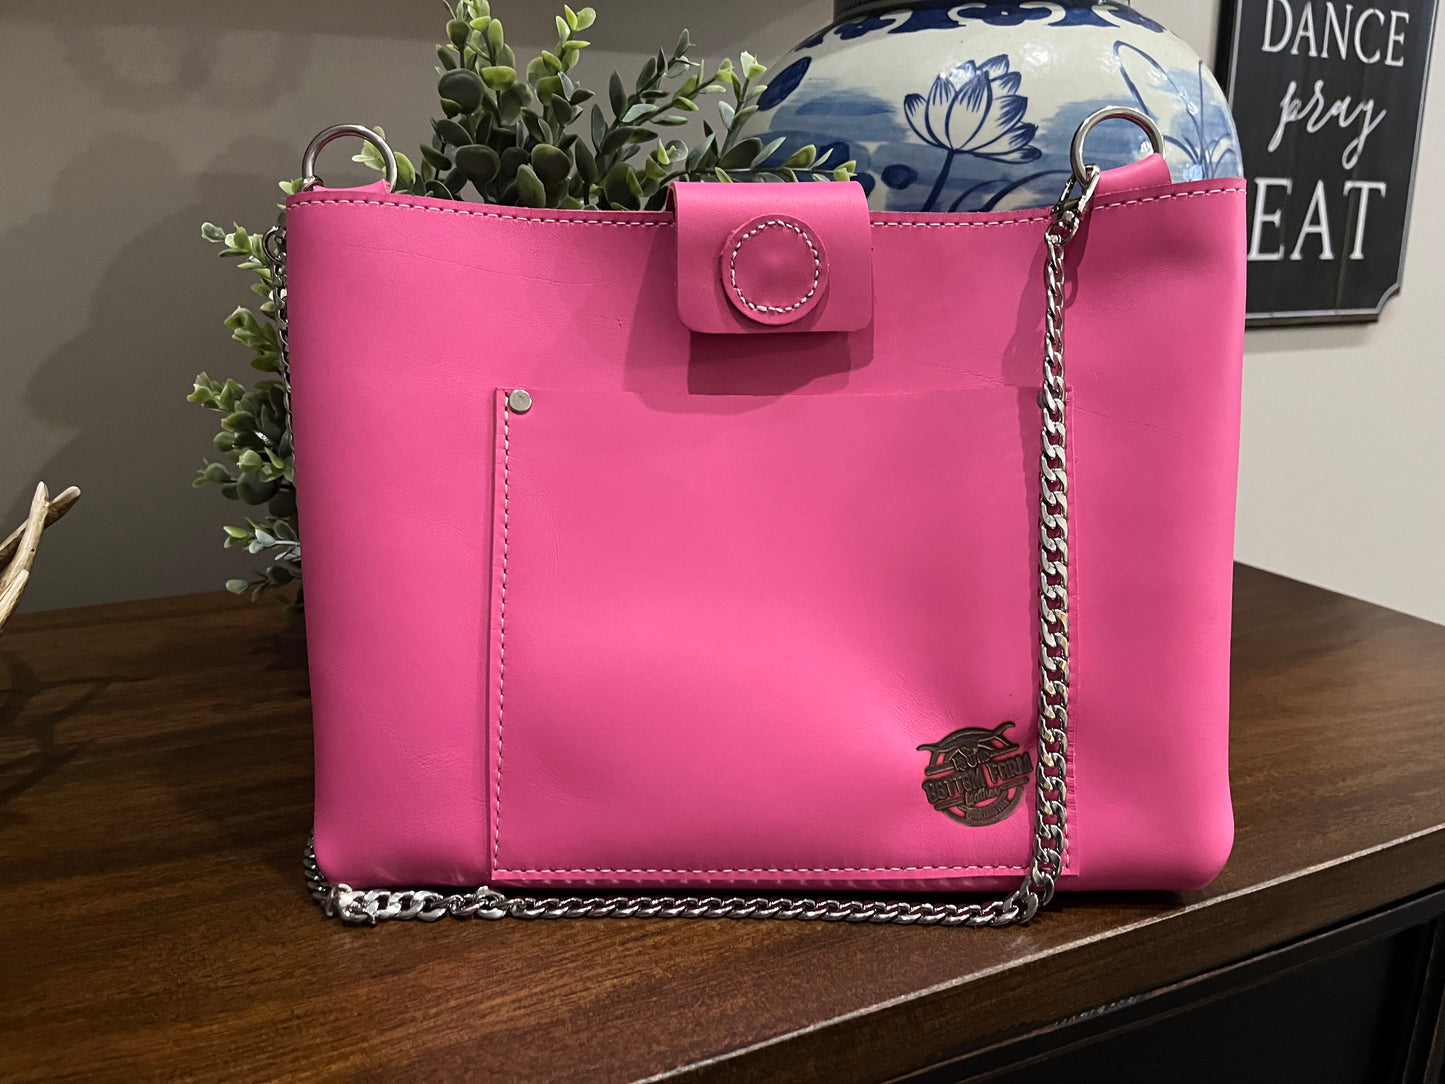 Full Grain Leather Shoulder Bag in Perfectly Pink